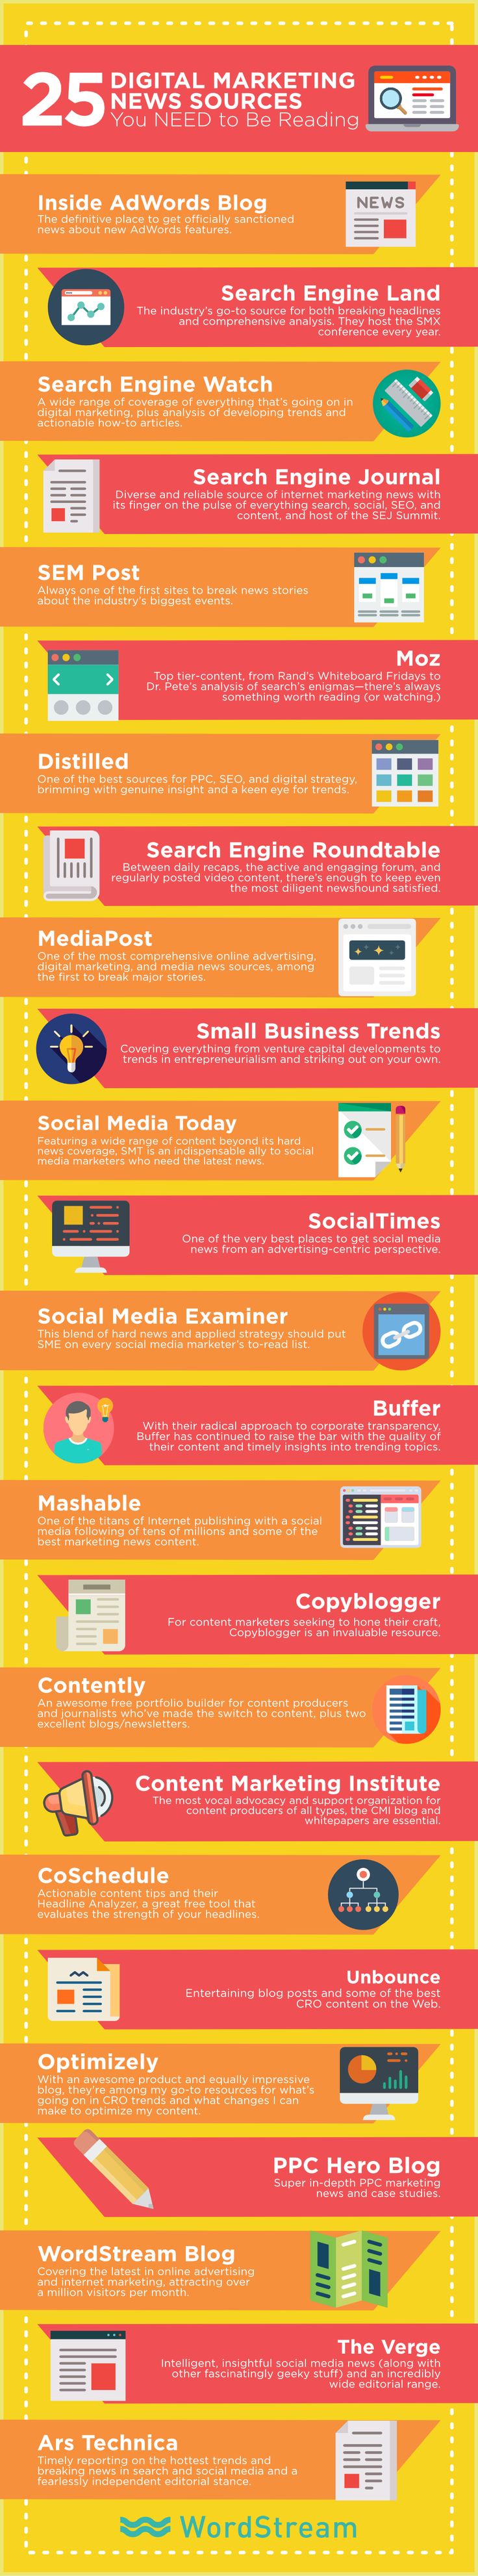 Digital-Marketing-25-Digital-Marketing-News-Sources-You-Need-to-Be-Reading-Infographic Digital Marketing : 25 Digital Marketing News Sources You Need to Be Reading- #Infographic